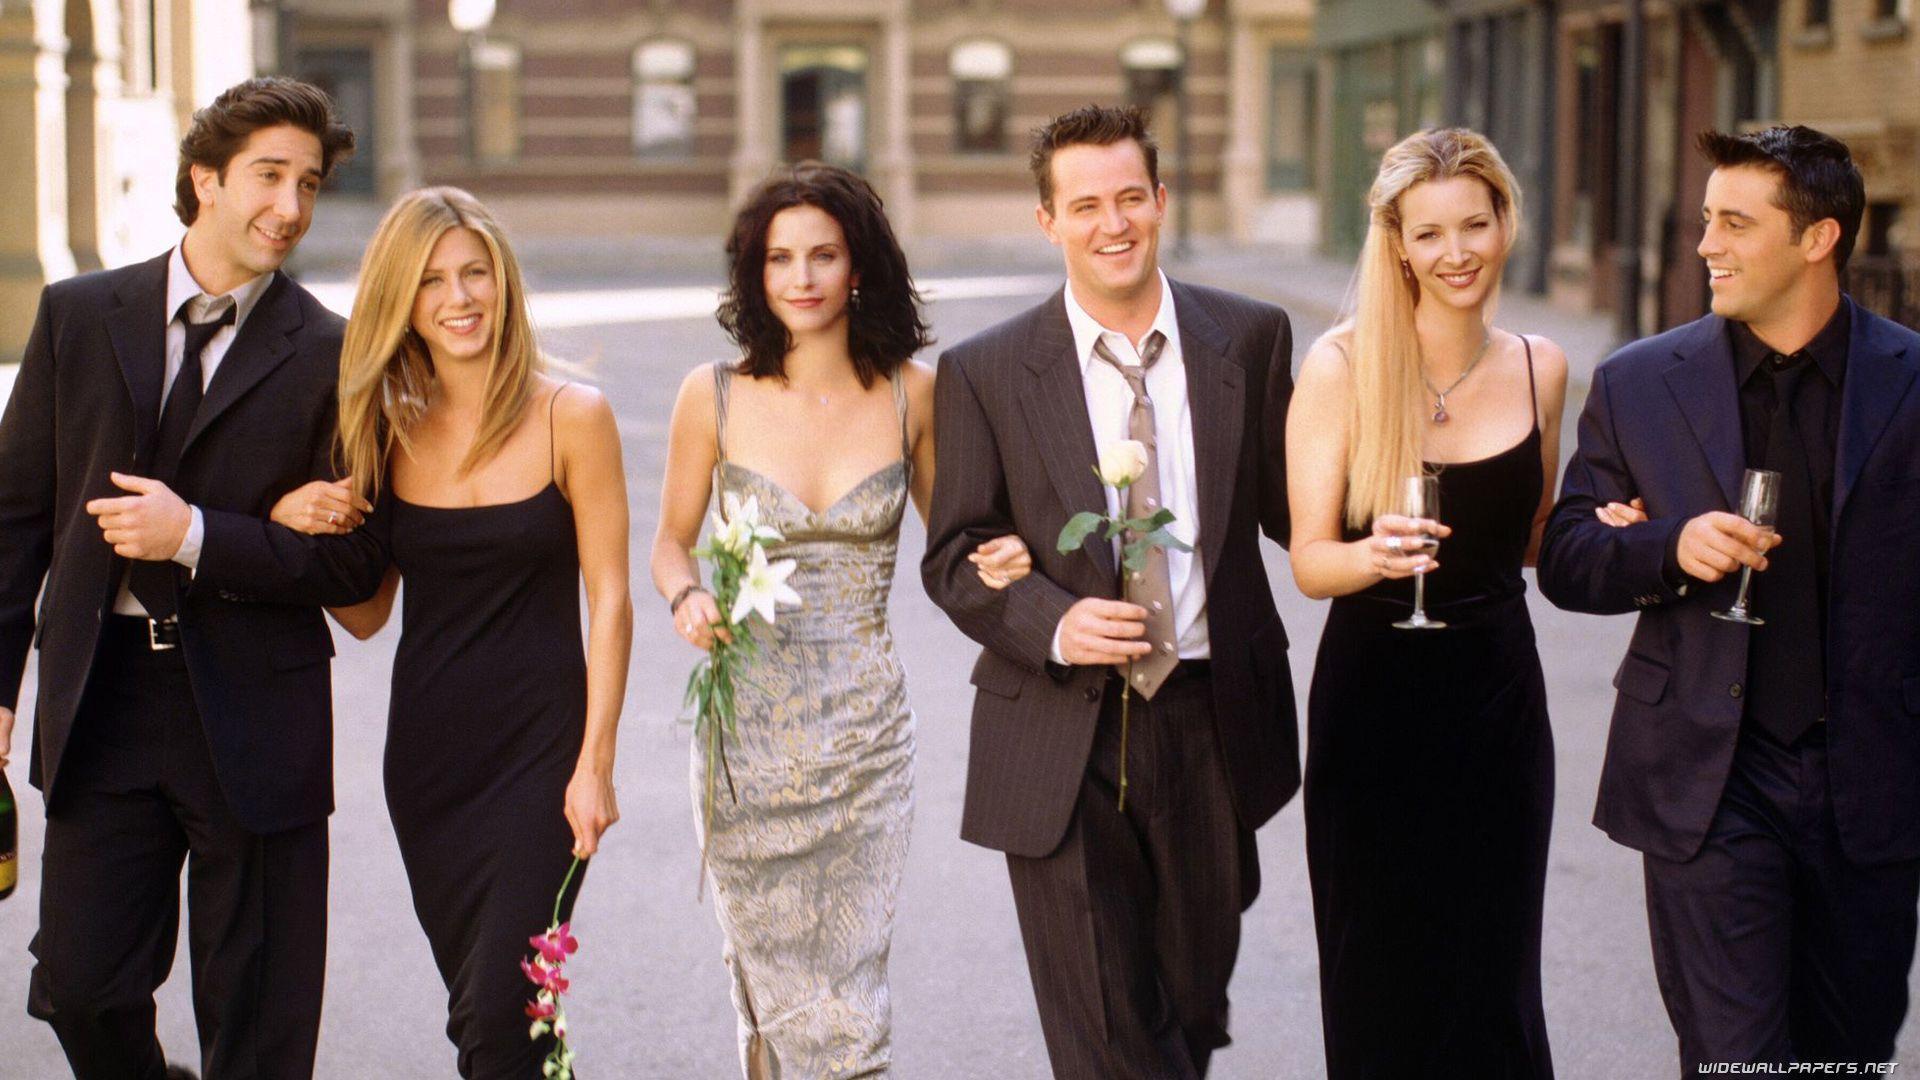 image For > Friends Tv Series Cover Photo